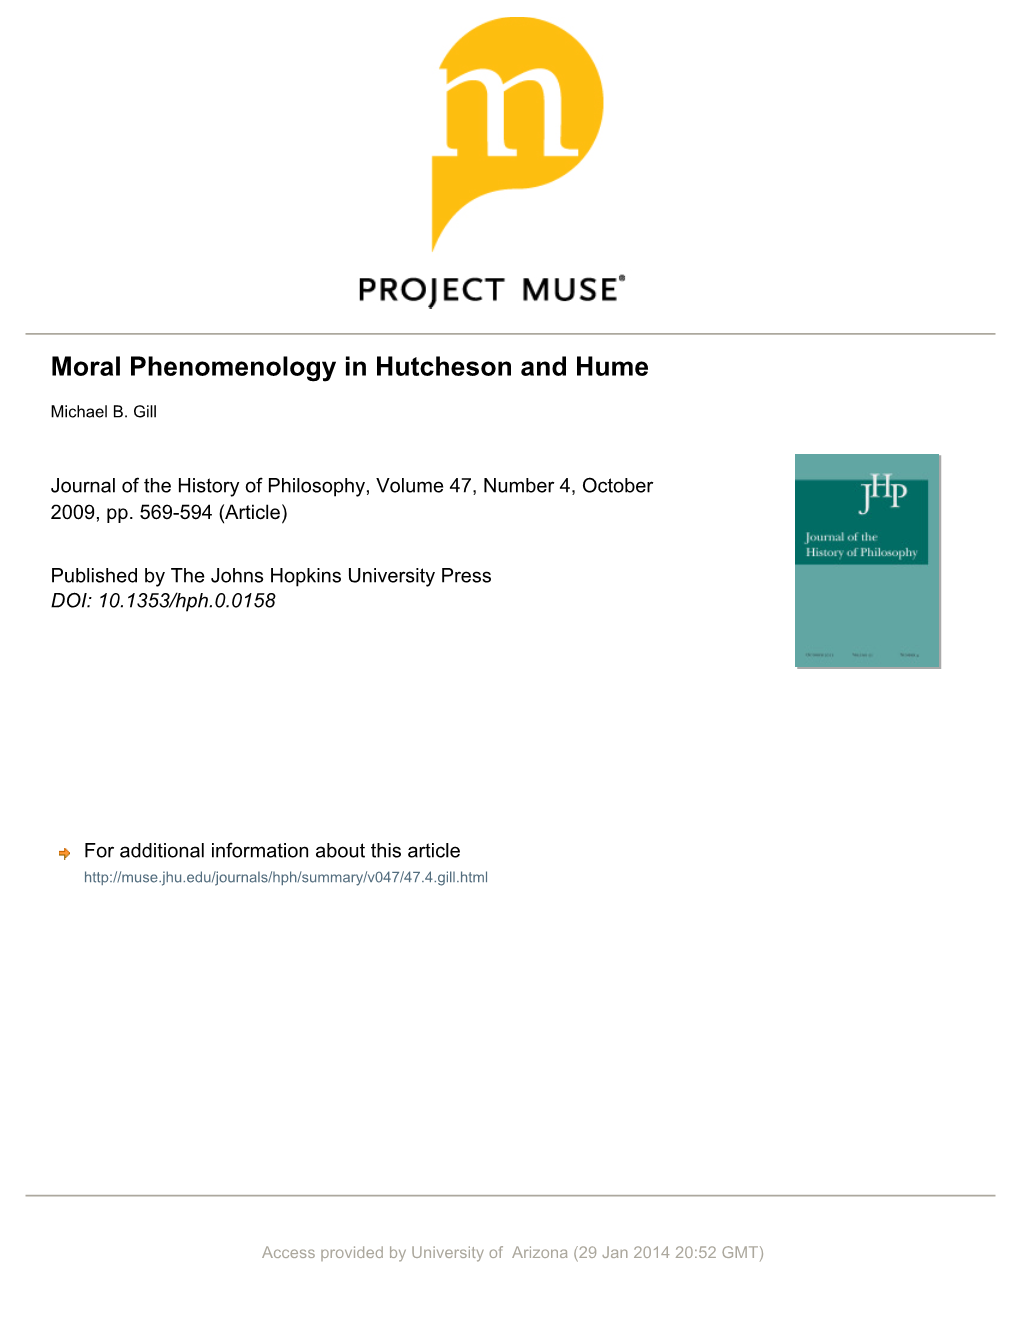 Moral Phenomenology in Hutcheson and Hume